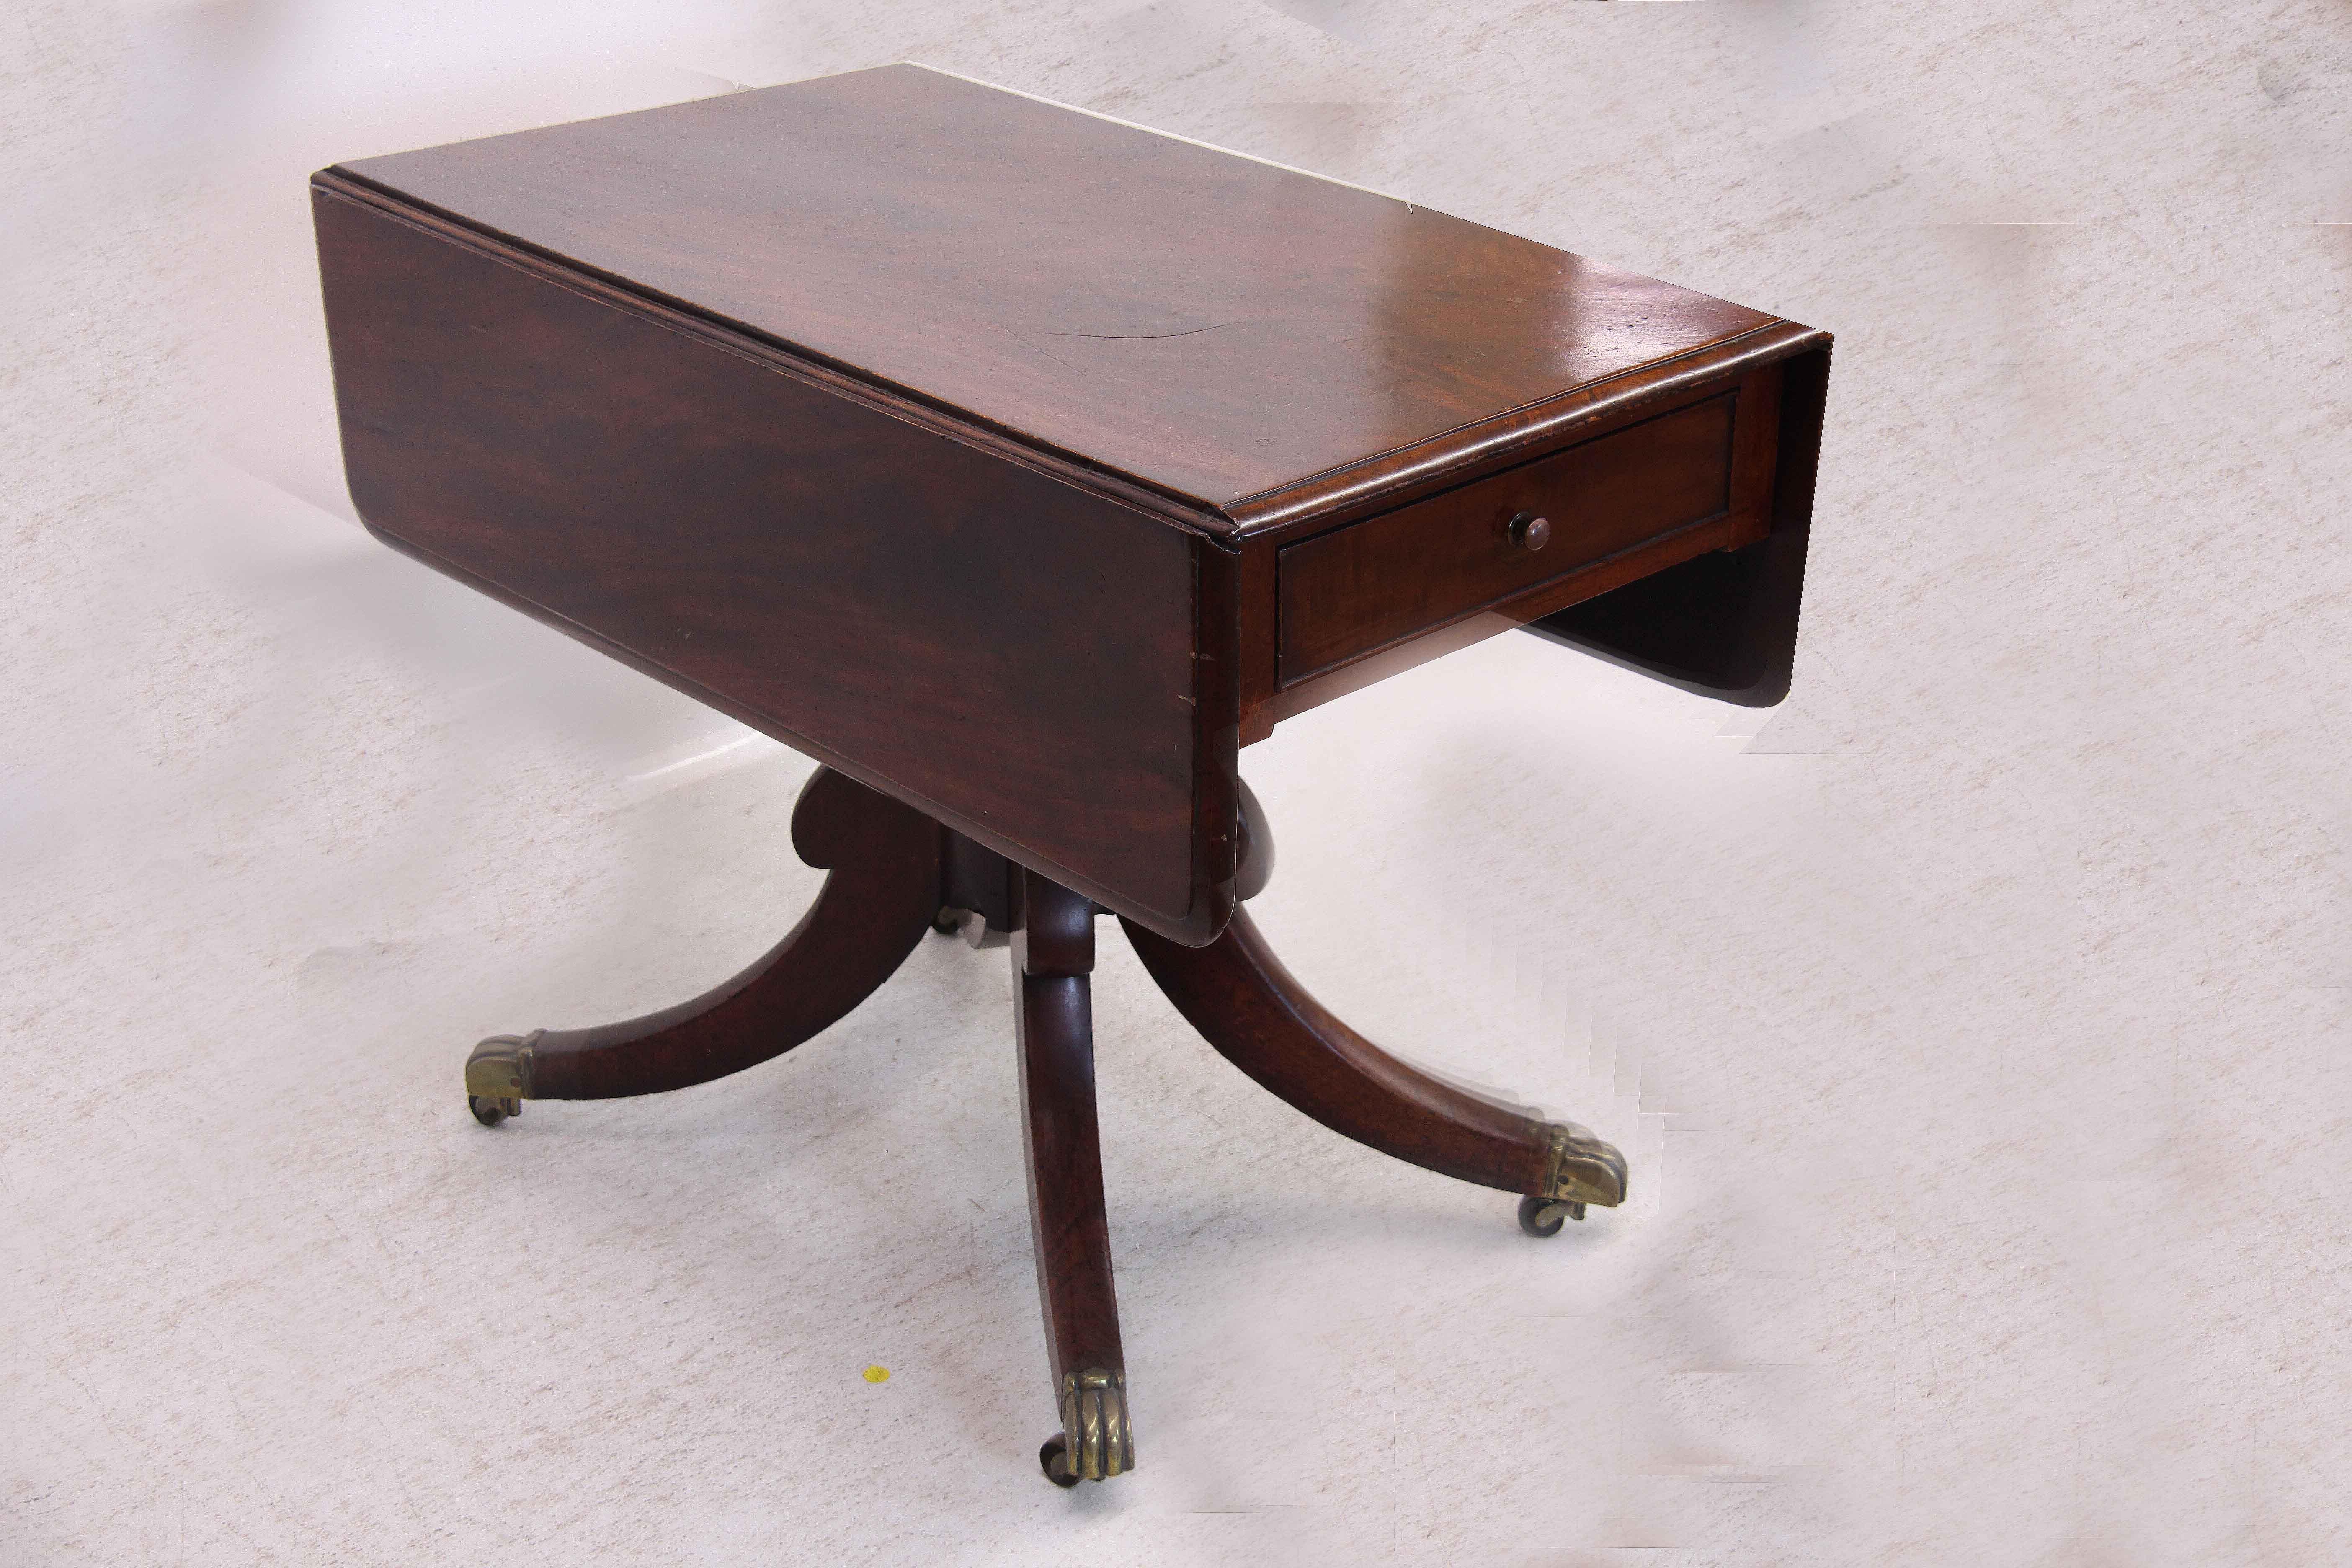 Sheraton drop leaf table, the top and leaves with beautiful figured mahogany, single drawer above nicely turned shaft with four legs terminating with original brass cup castors. The leaves are supported in the upright position with double